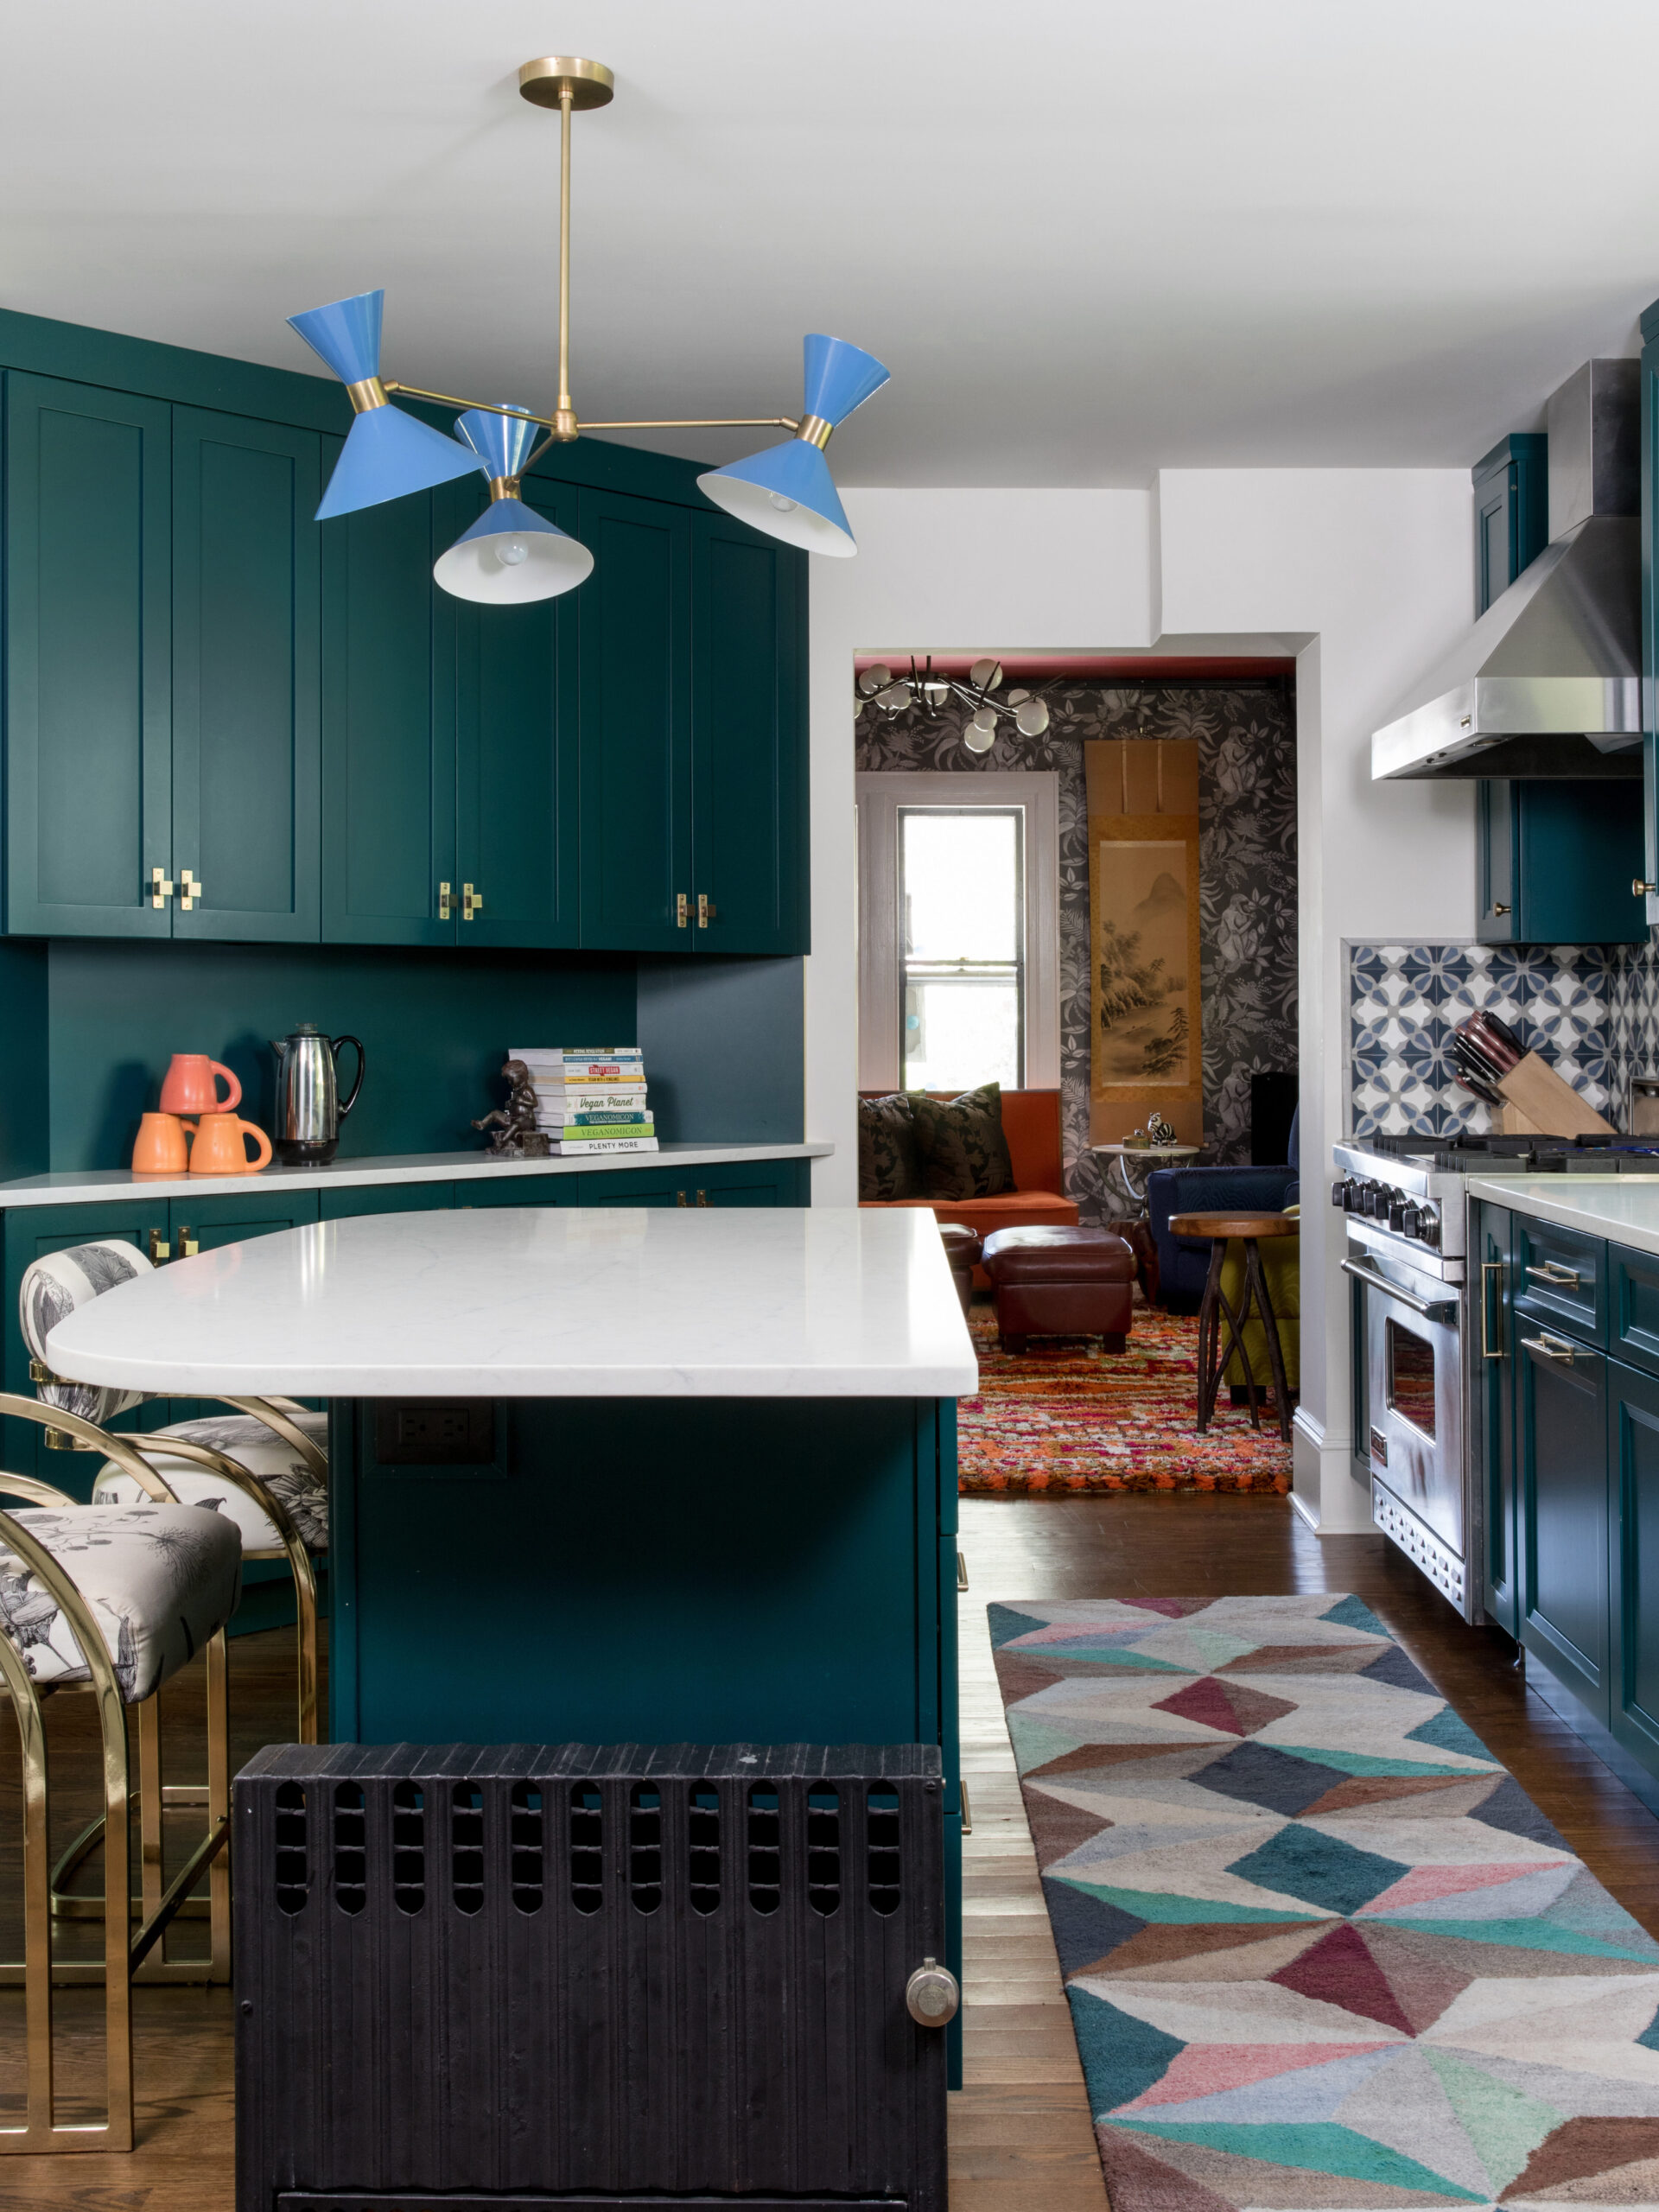 After image of a modern kitchen with blue paint.